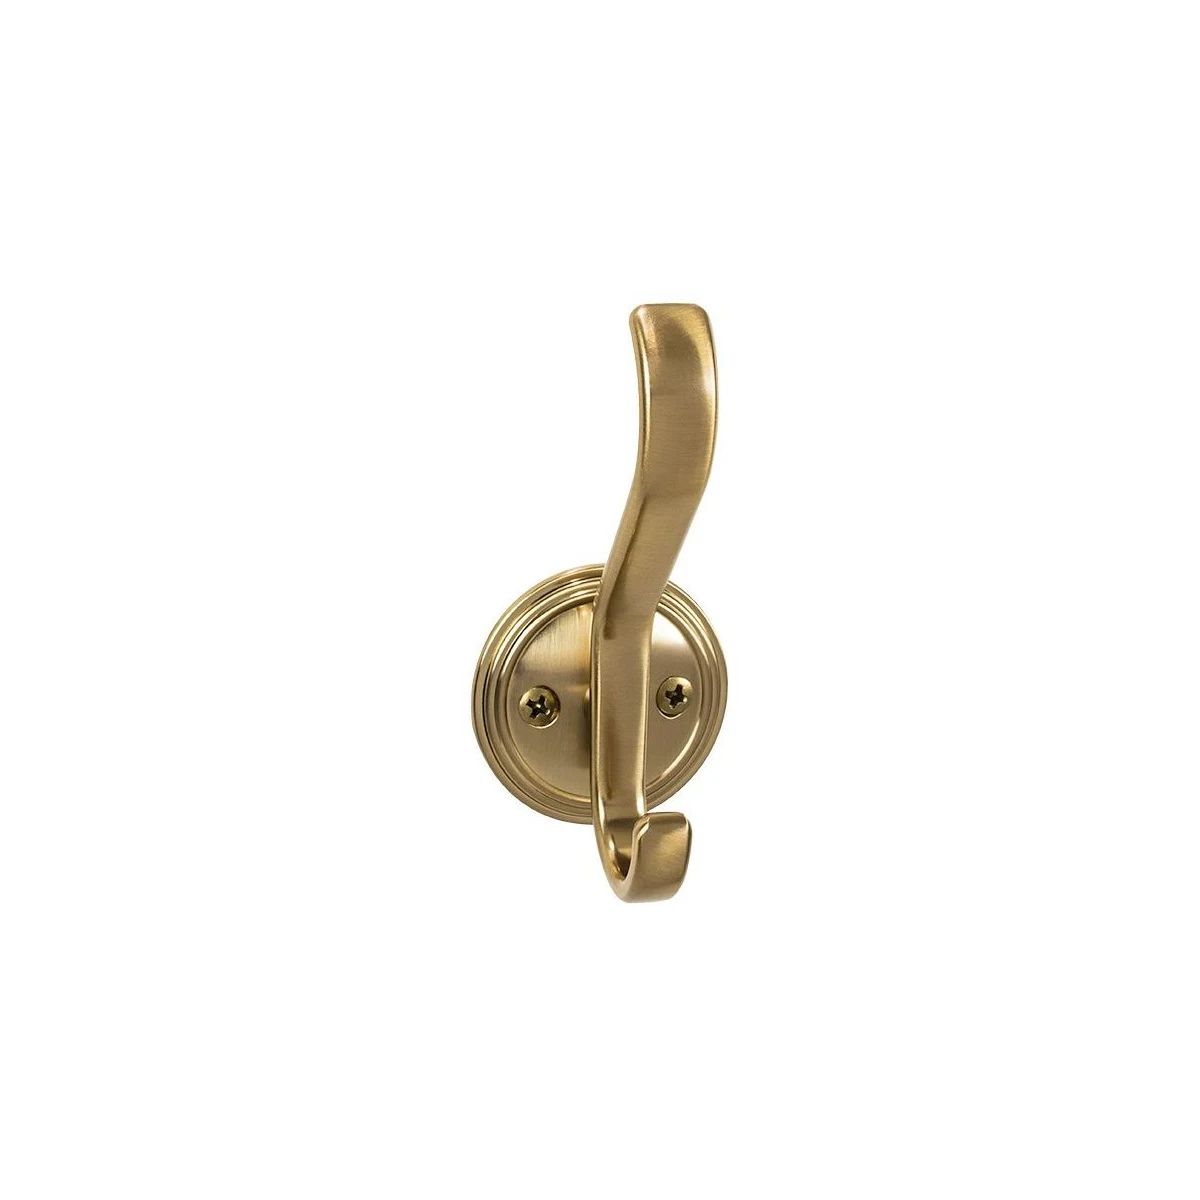 Reeded Wall Mounted Double Robe Hook from the Hooks Collection | Build.com, Inc.